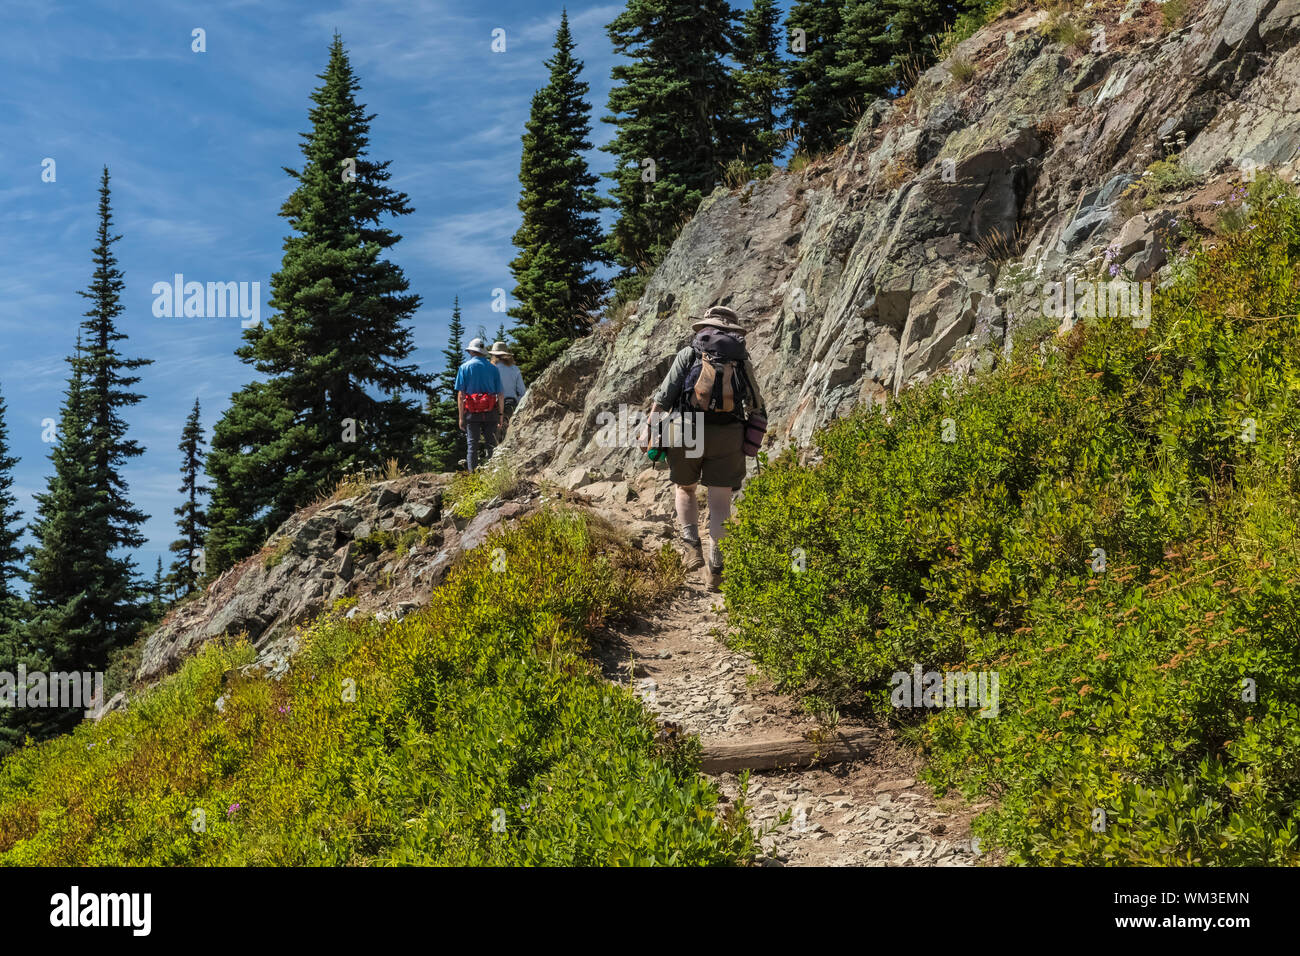 Hiking along the Naches Peak Loop Trail in Mount Rainier National Park, Washington State, USA [No model releases; available for editorial licensing on Stock Photo